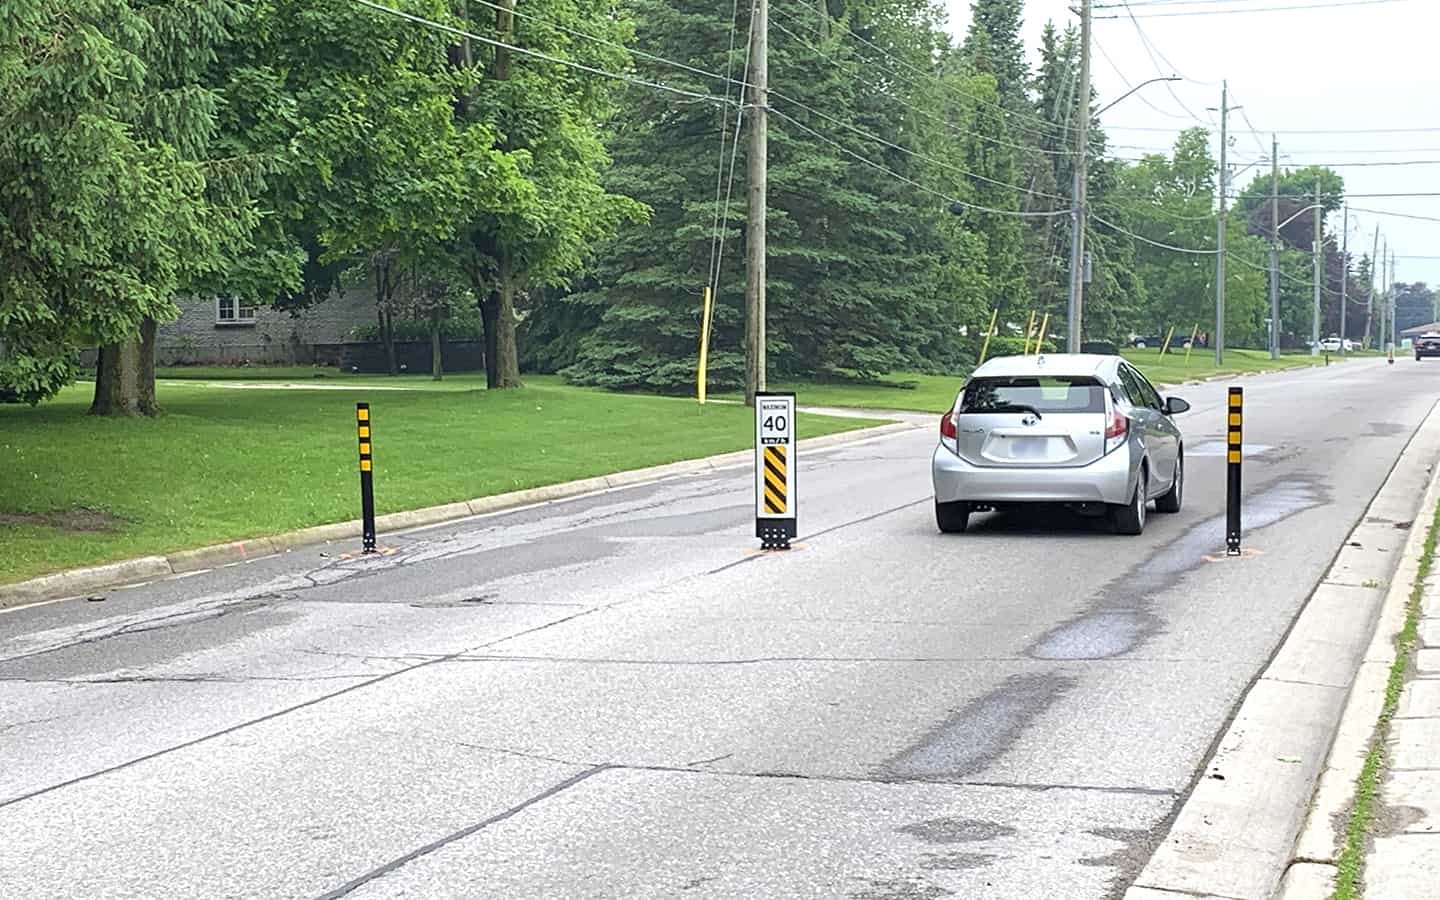                      Theft of bollards may be a comment on Oriole Parkway traffic-calming measures                             
                     